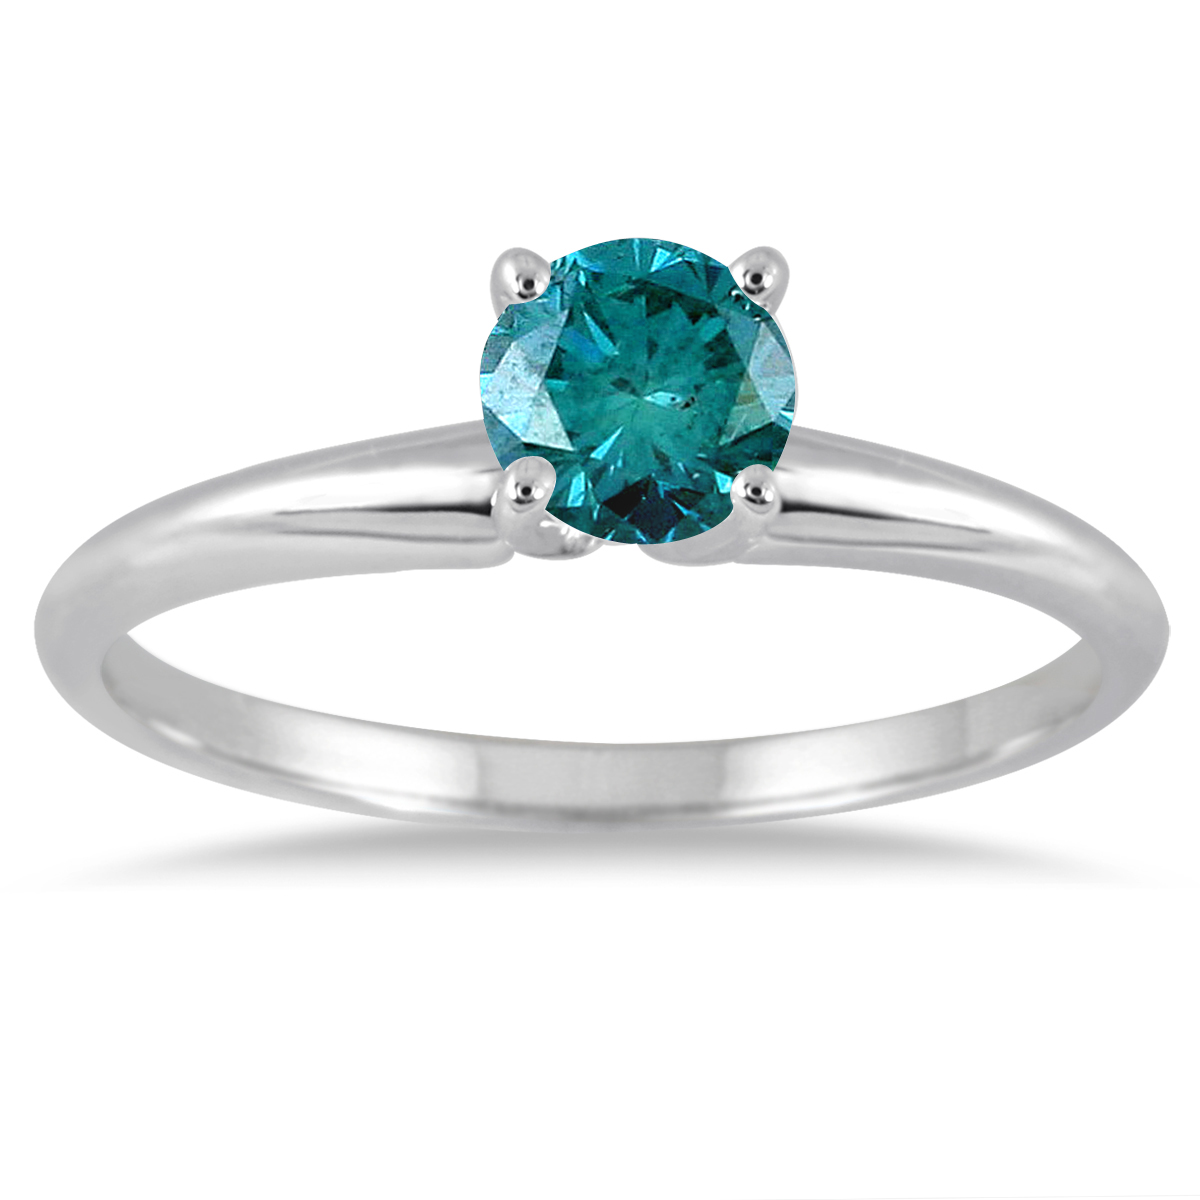 0.33 Carat Round Blue Diamond Solitaire Ring in 14k White Gold